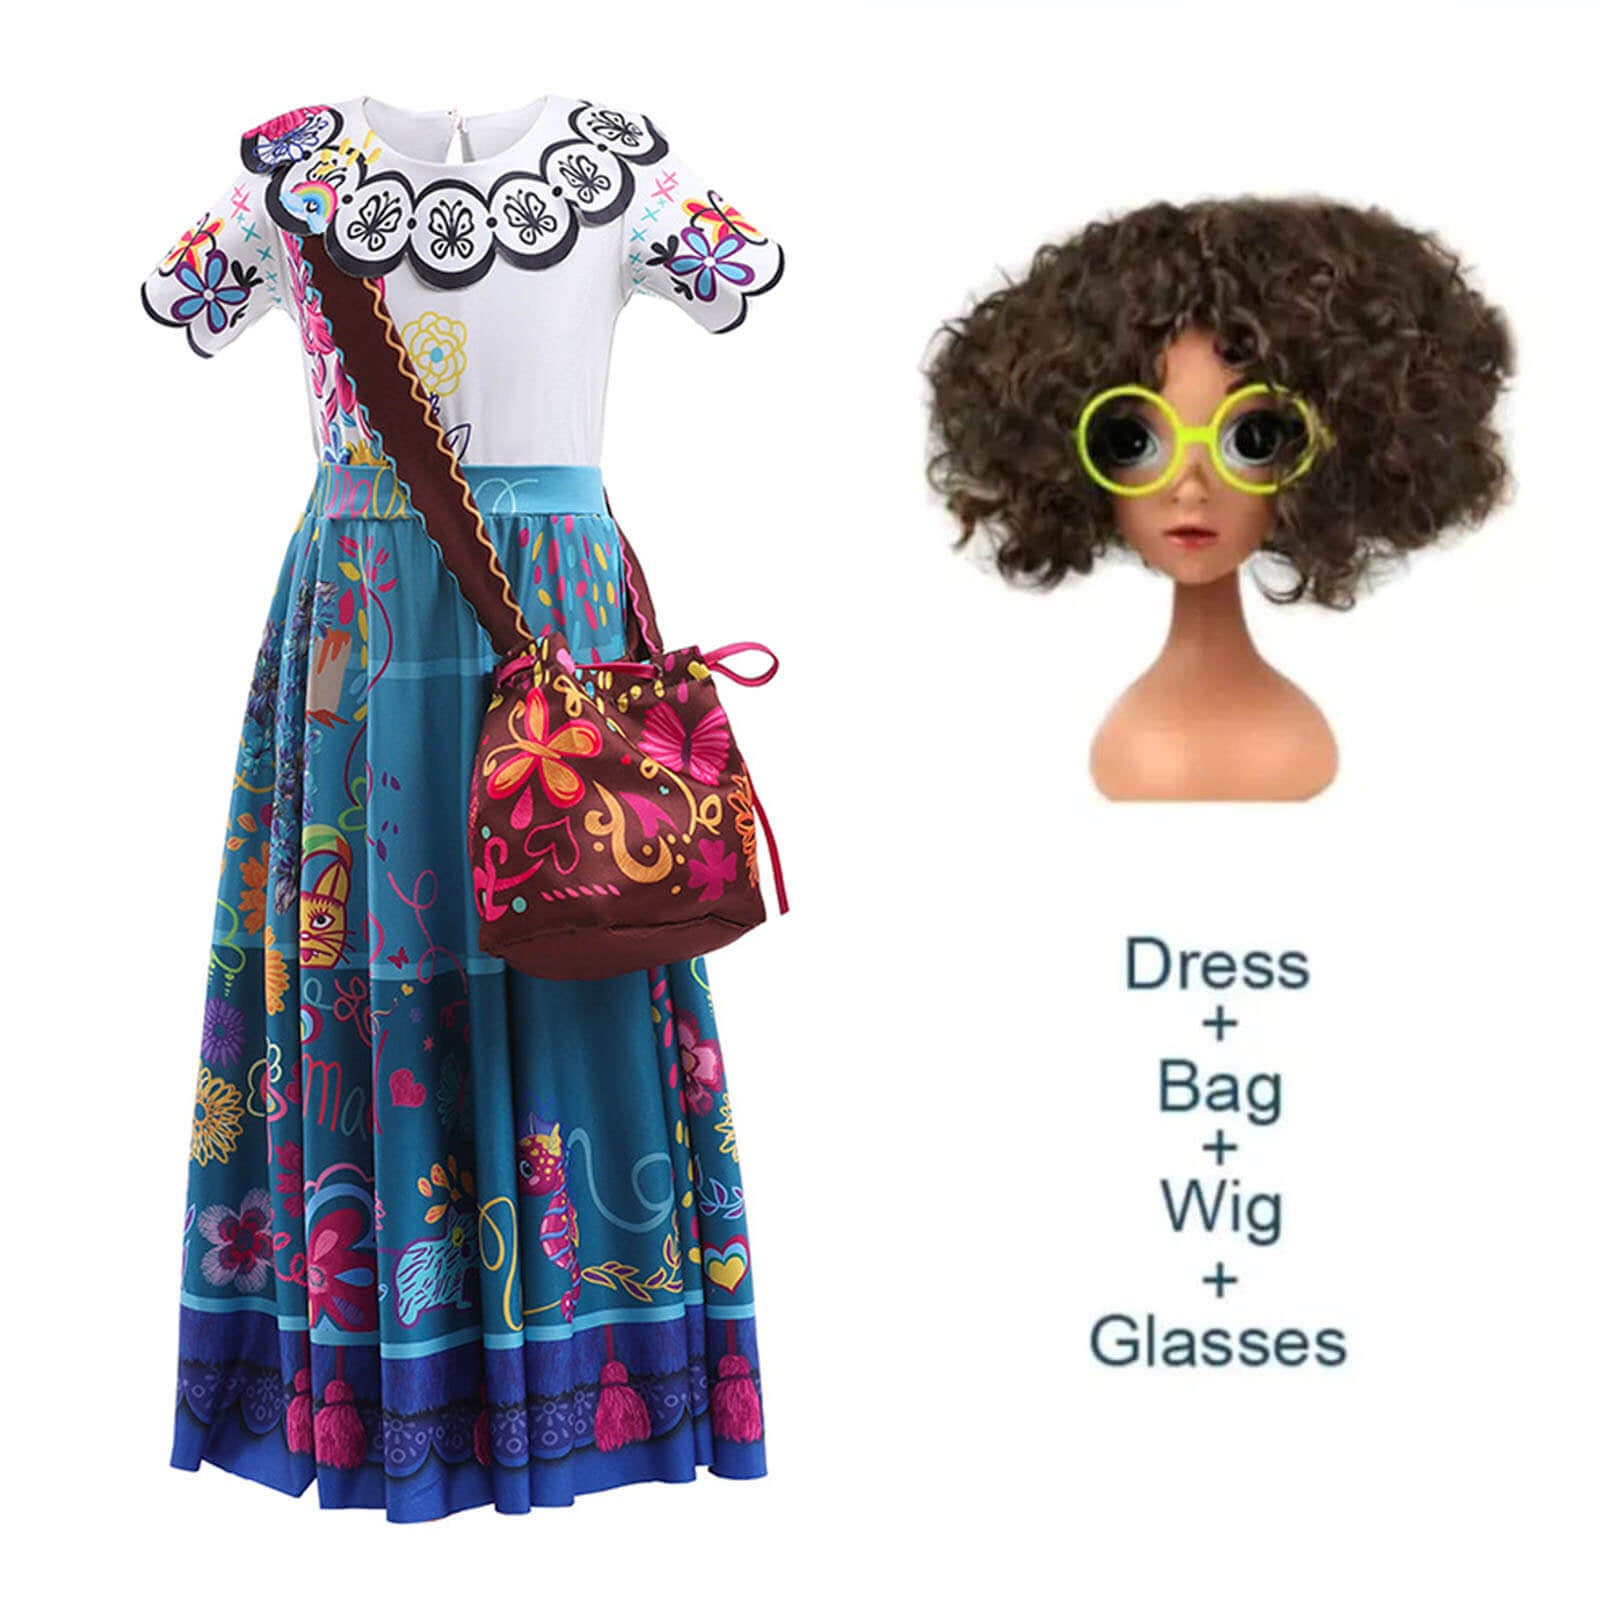 Kids Mirabel Dress with Bag and Wig Glasses Girl's Magical Mardrigal Costume Full Set